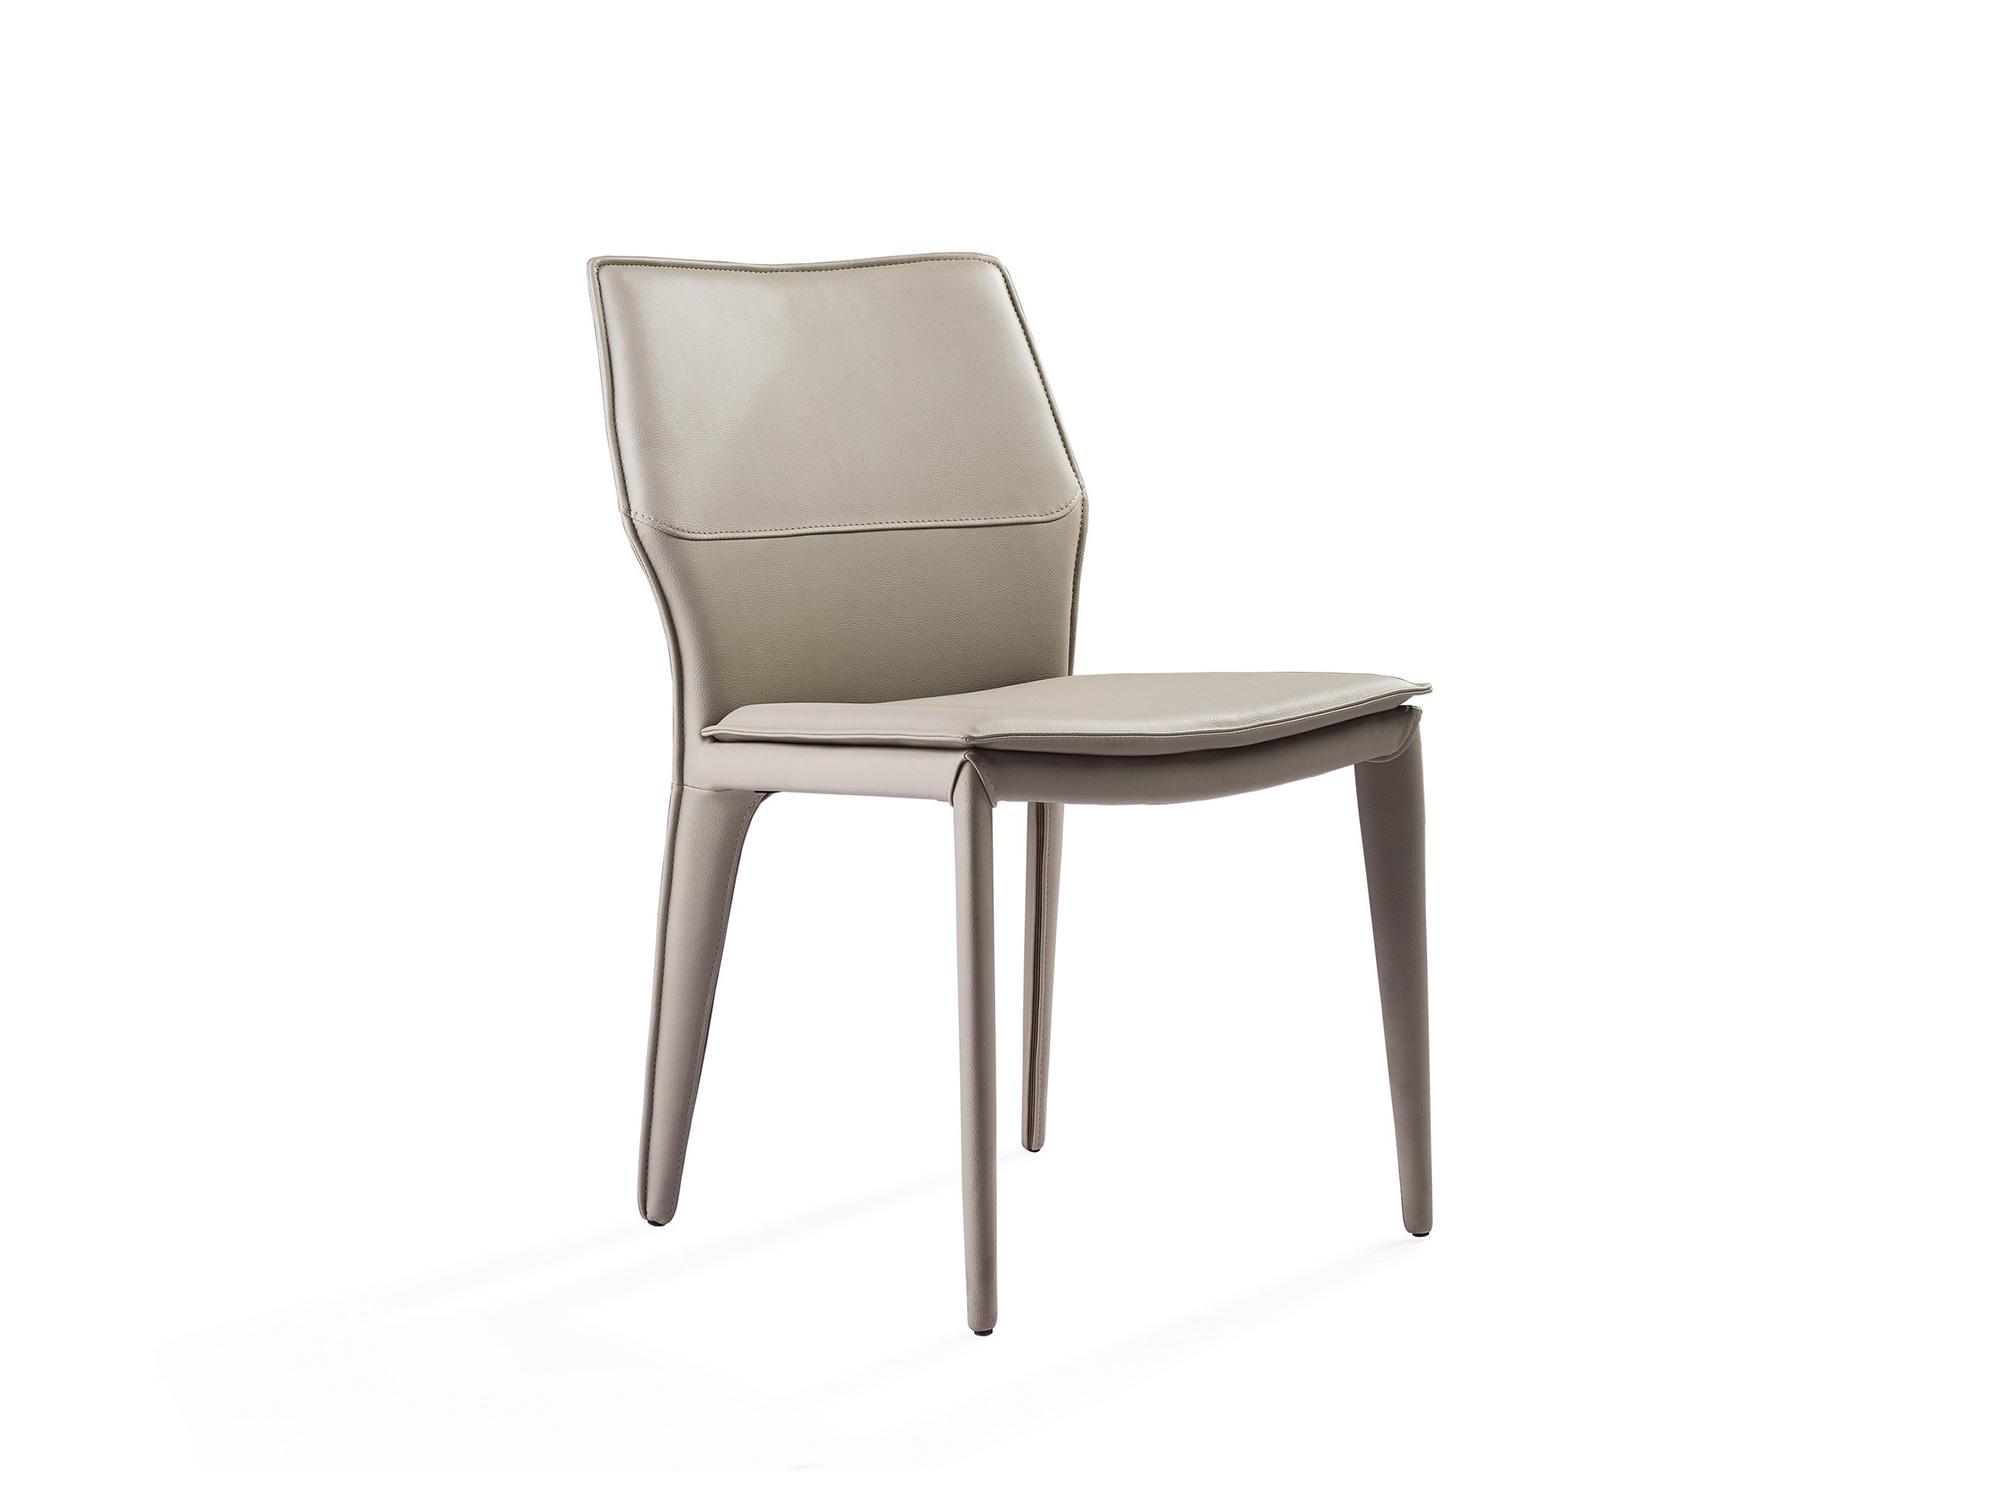 Modern Dining Chair Set DC1475-LGRY Miranda DC1475-LGRY in Light Gray Faux Leather